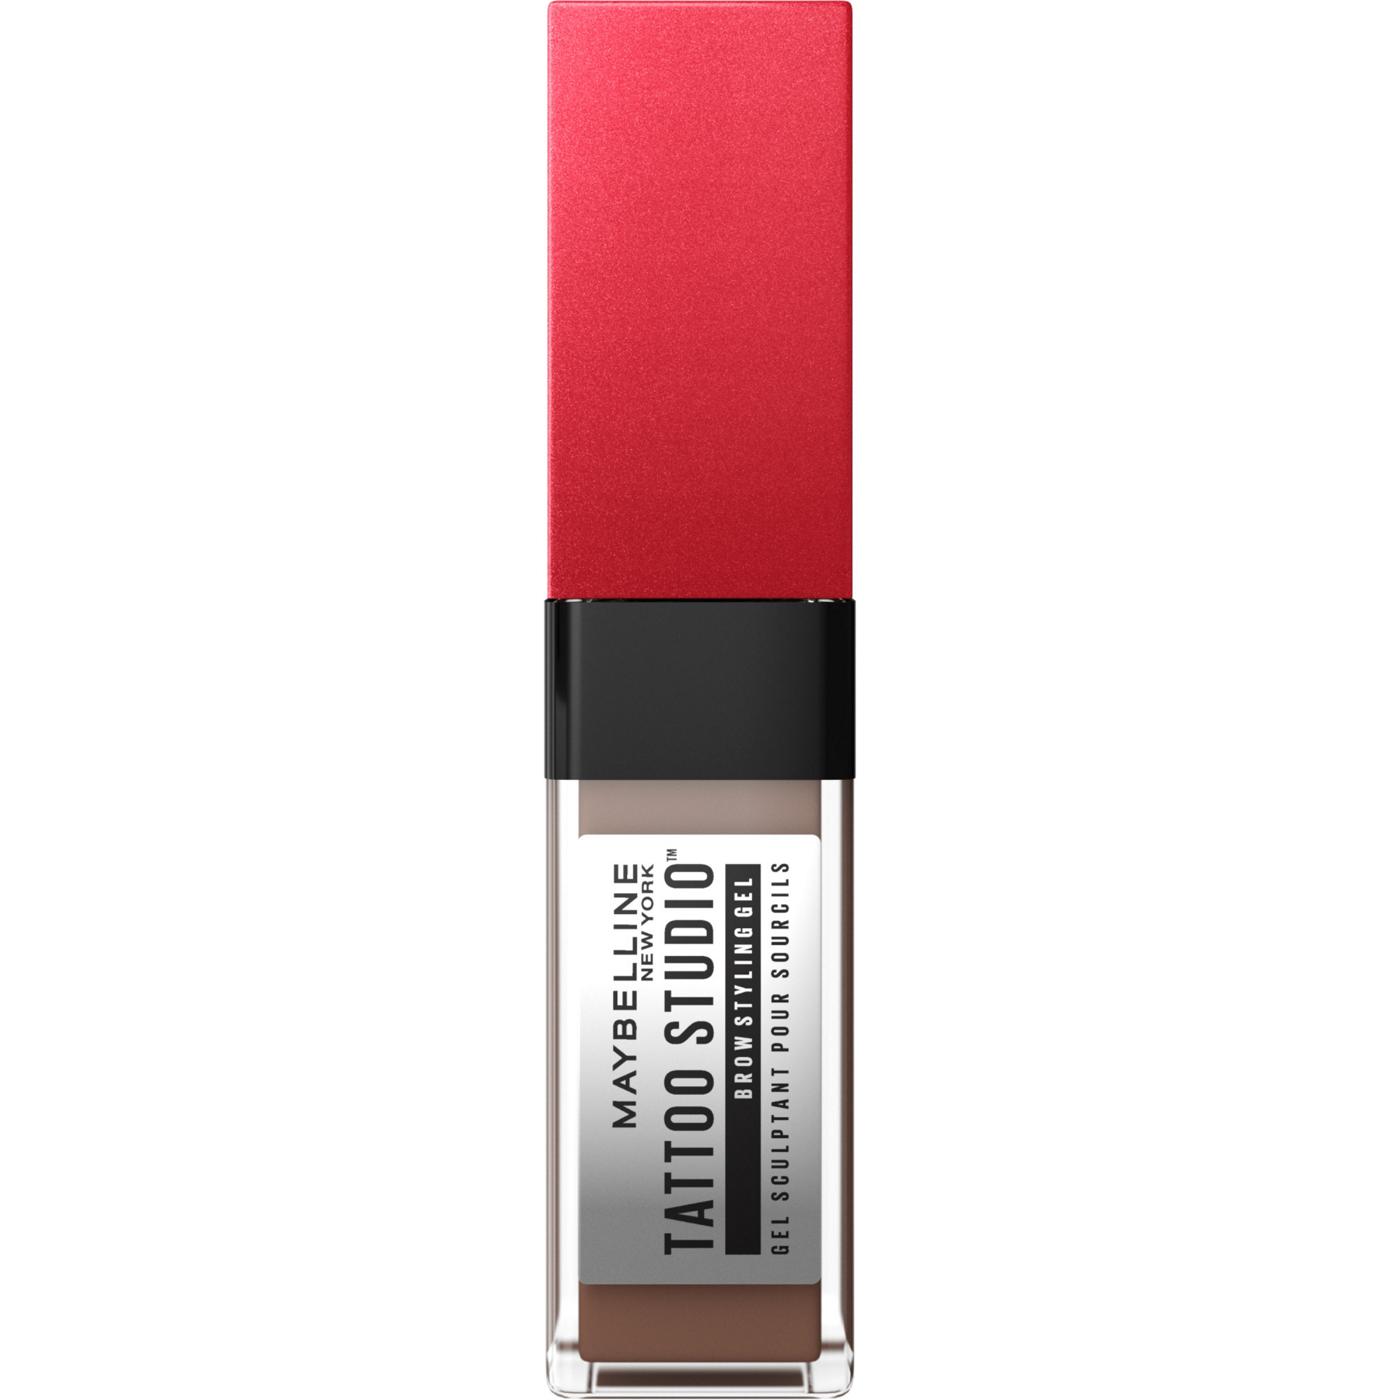 Maybelline Tattoo Studio Brow Styling Gel - Soft Brown; image 2 of 9